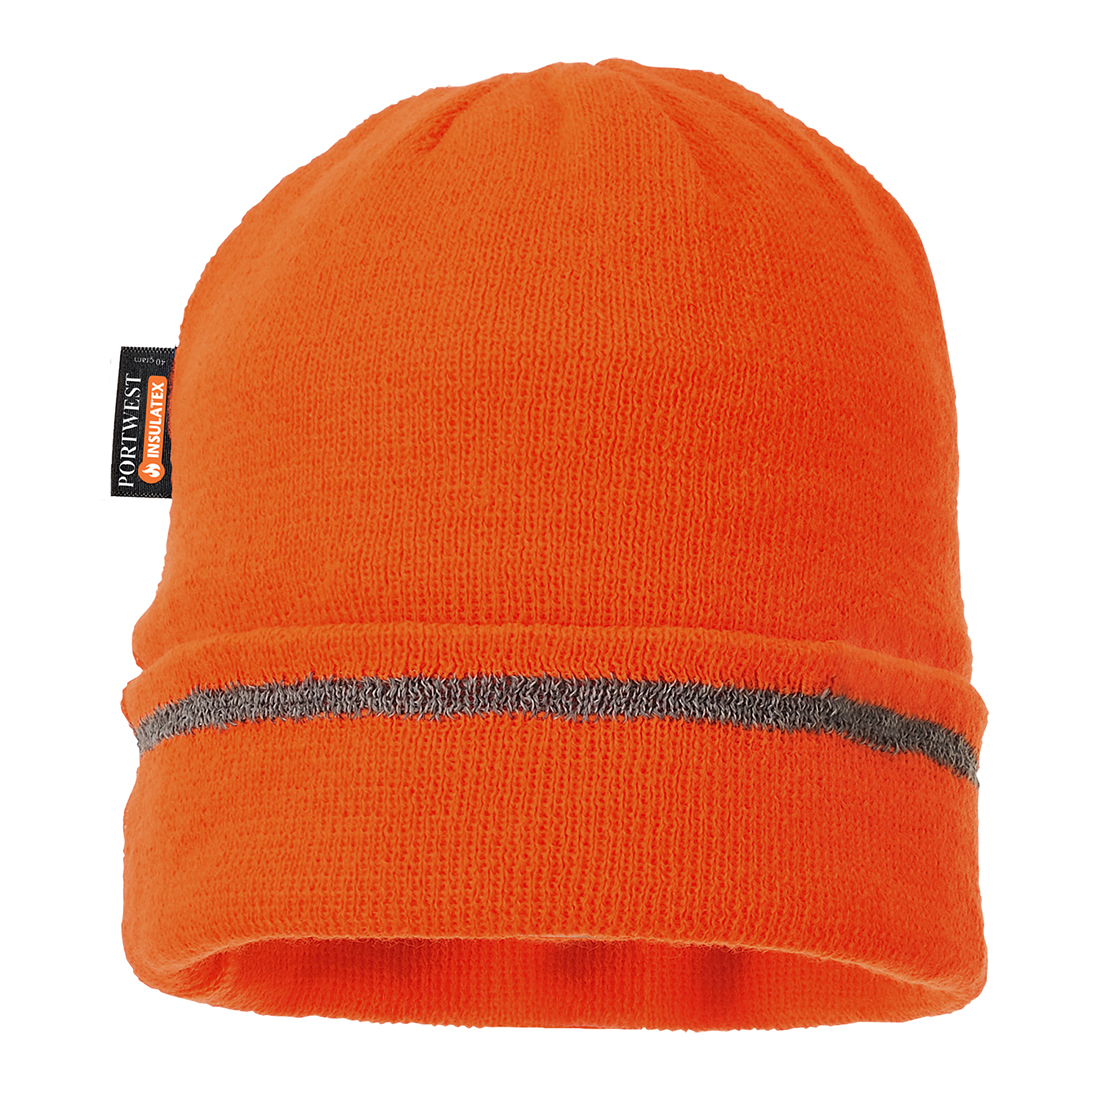 Knitted Hat Reflective Trim